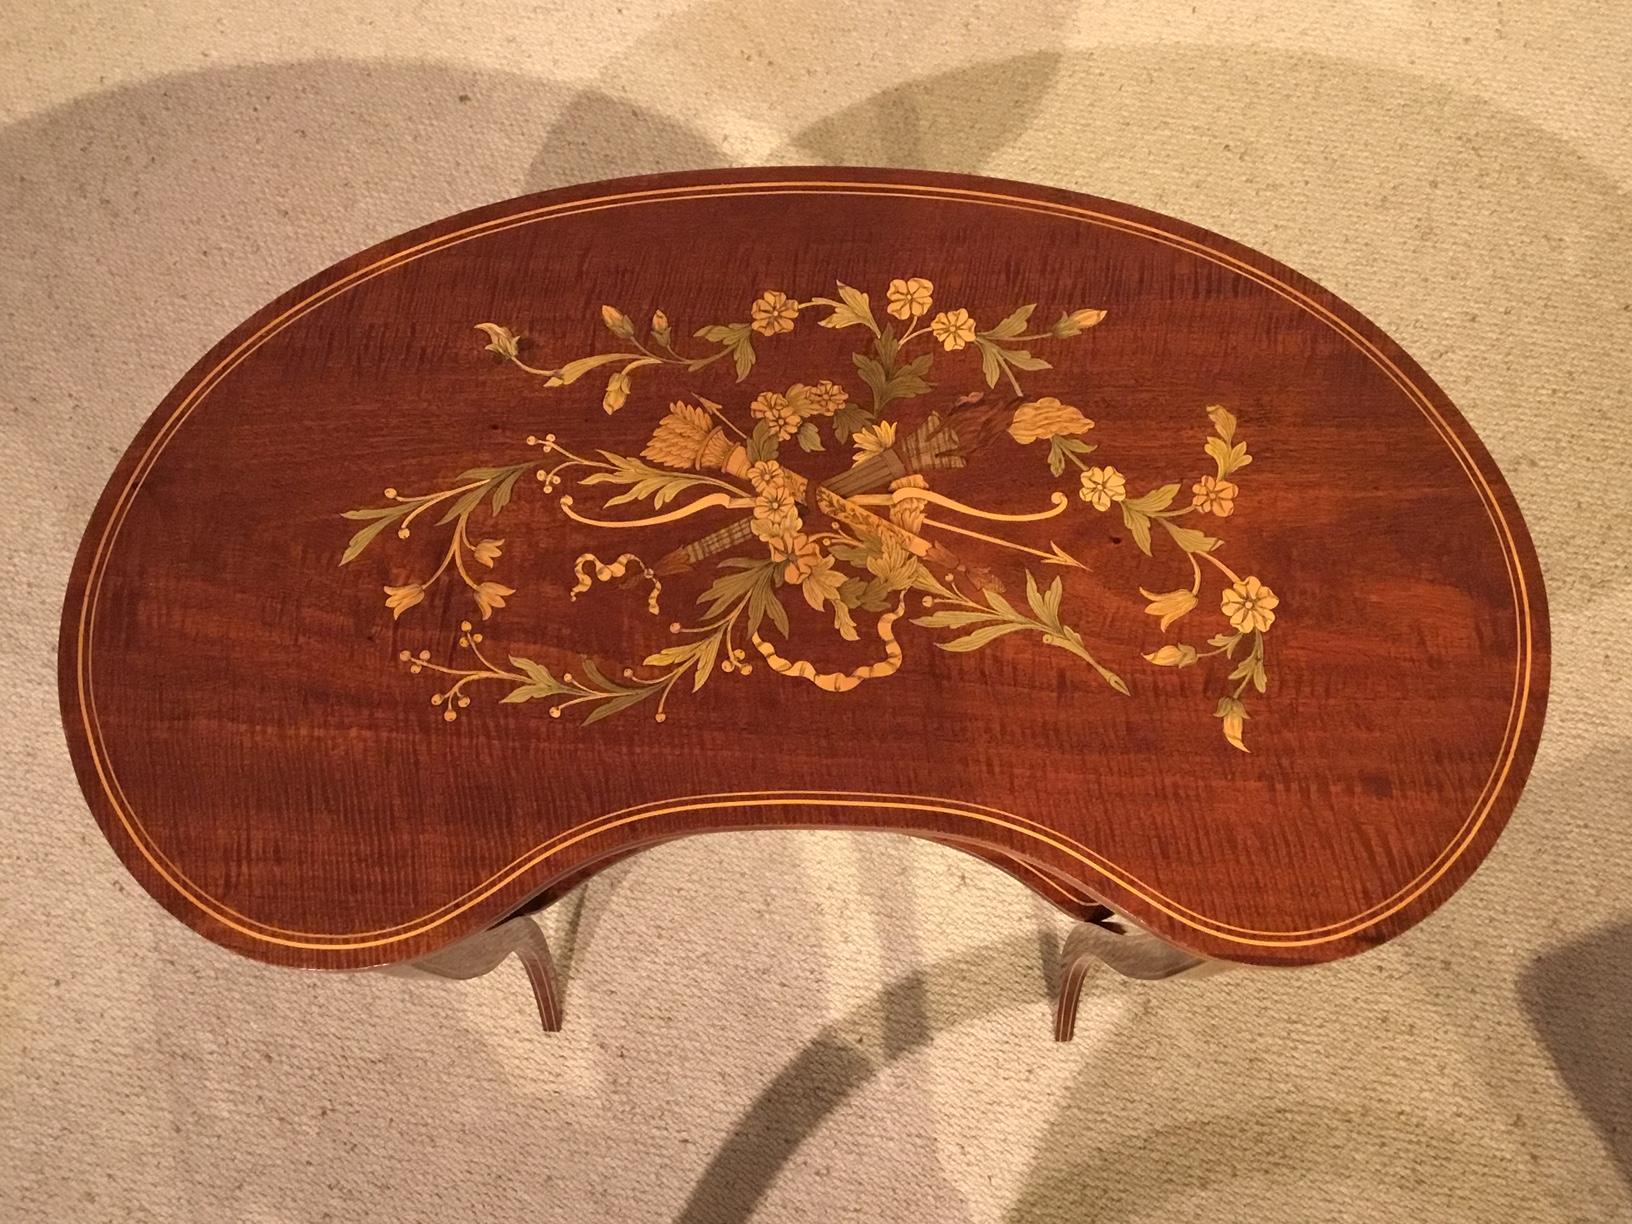 A beautiful mahogany and marquetry inlaid Edwardian period kidney shaped occasional table. The kidney shaped fiddleback mahogany top with a wonderful marquetry inlaid panel and a variety of exotic wood and veneers. Supported on shaped supports